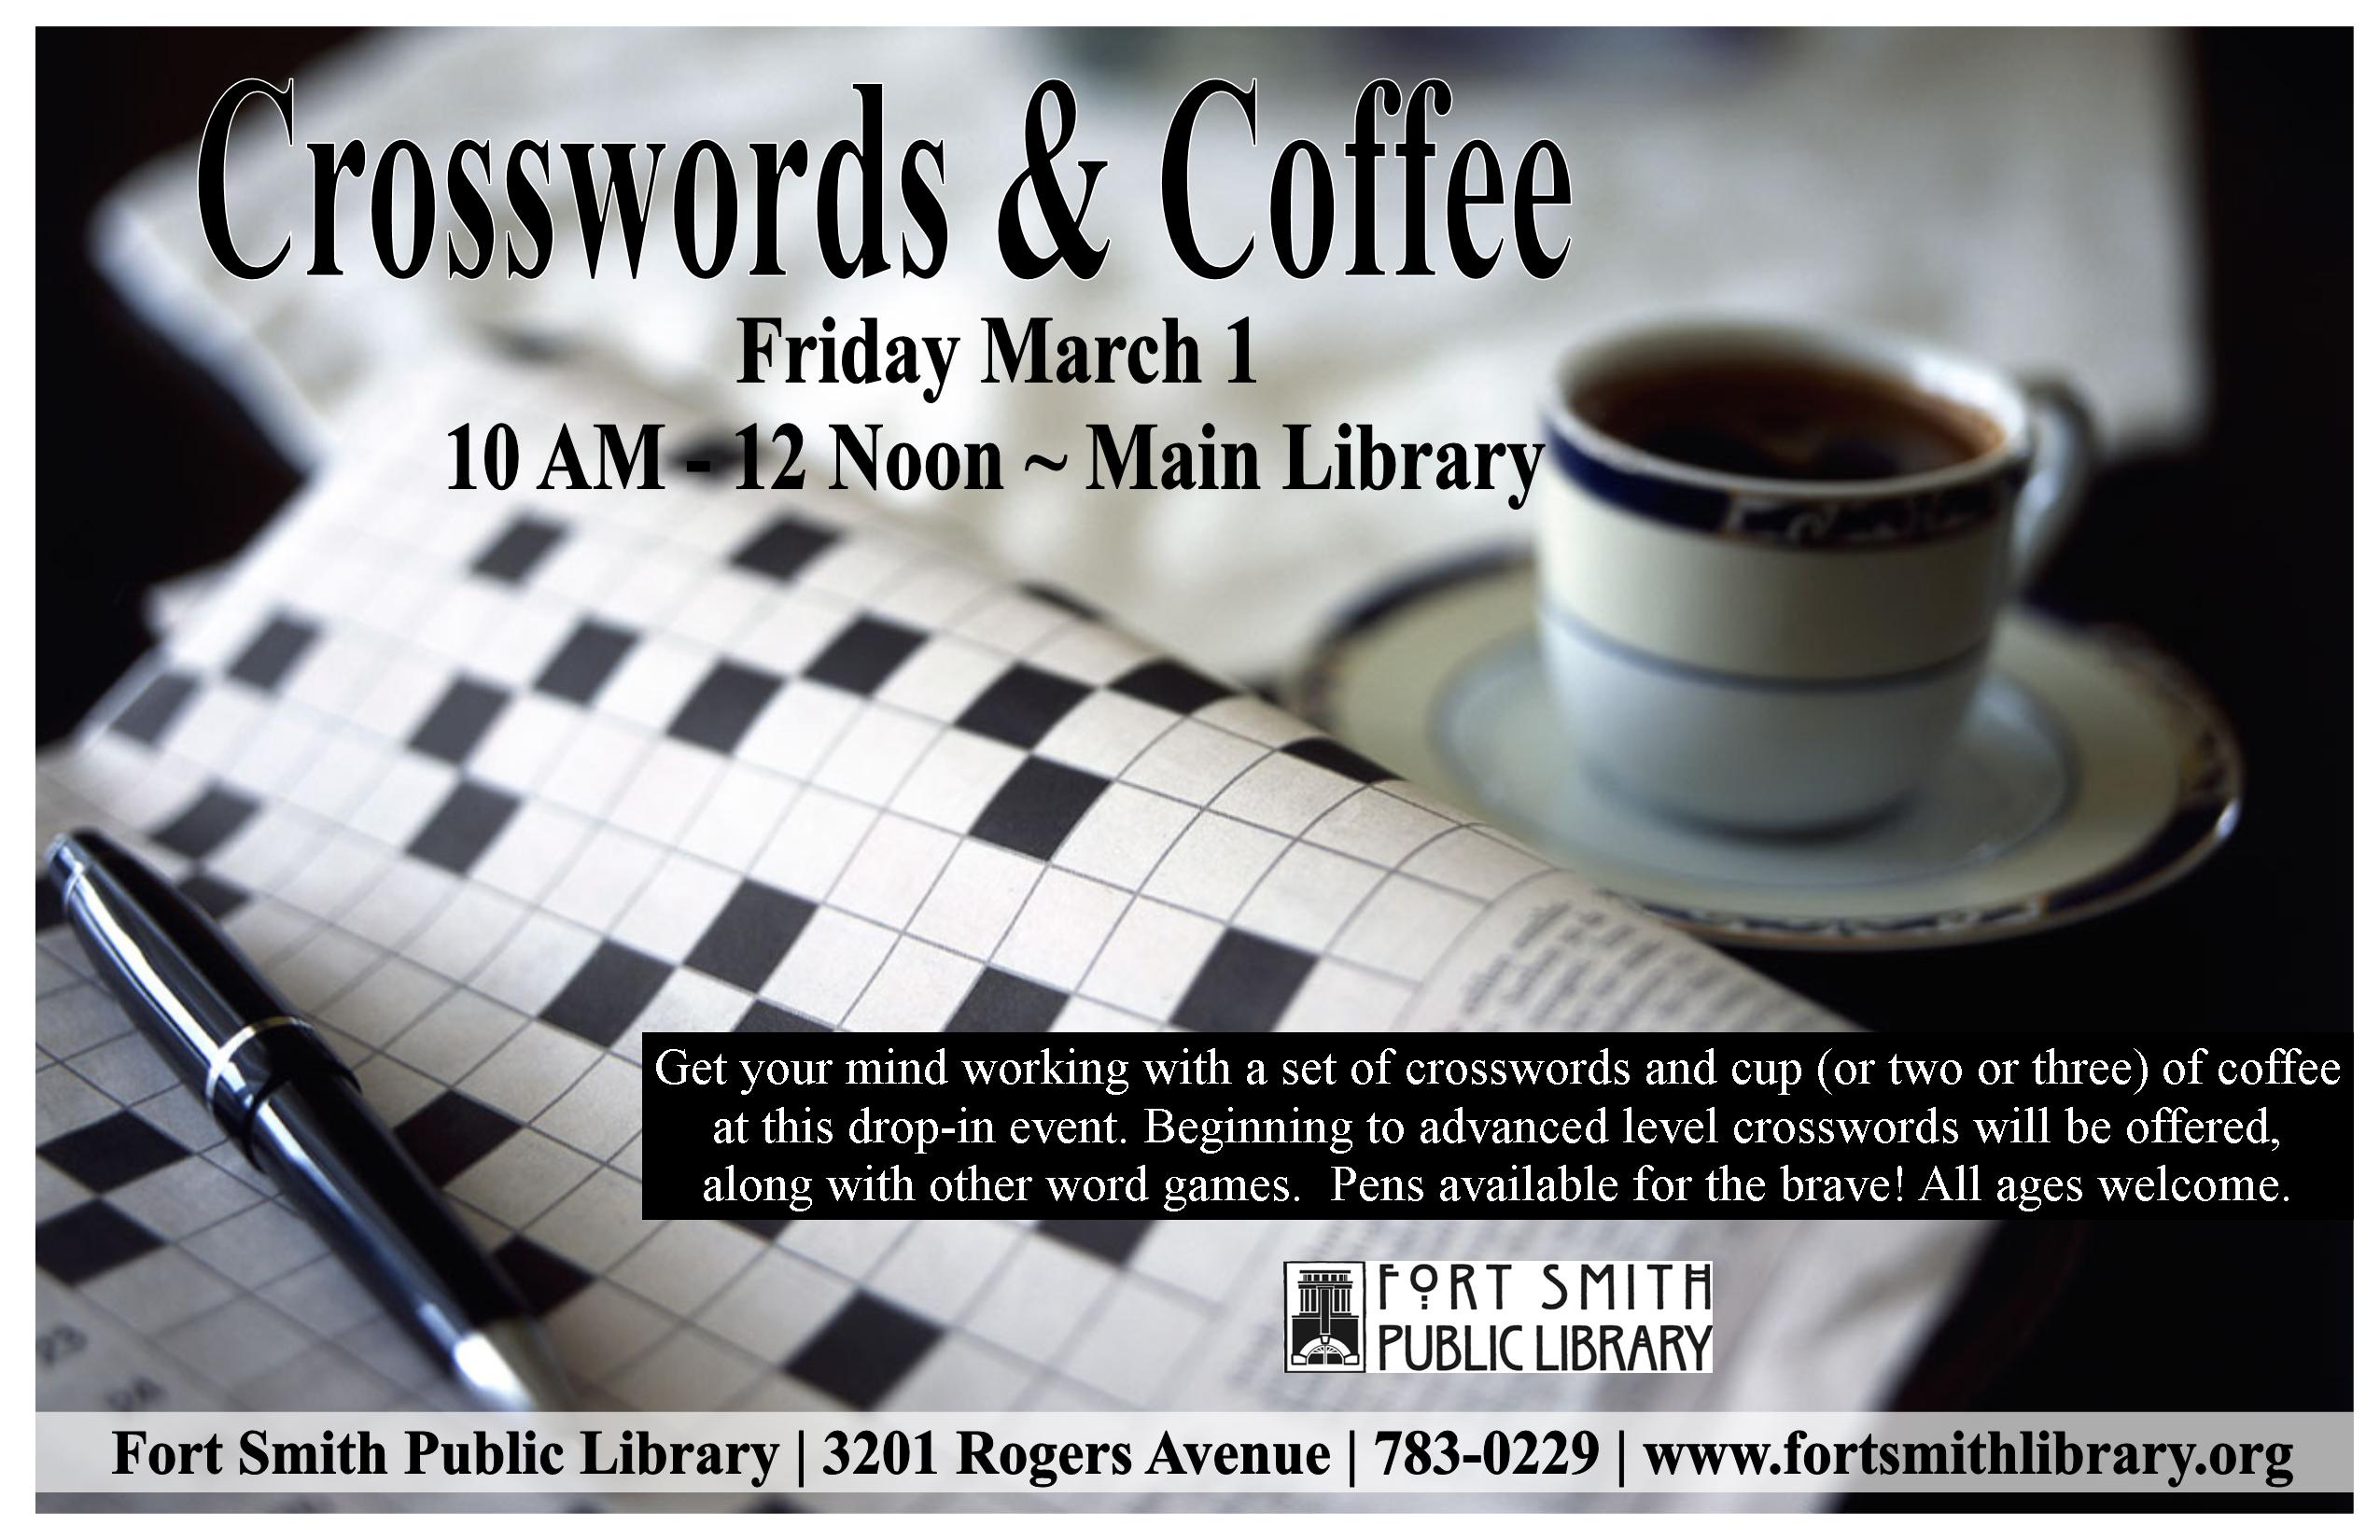 Crosswords and Coffee event poster